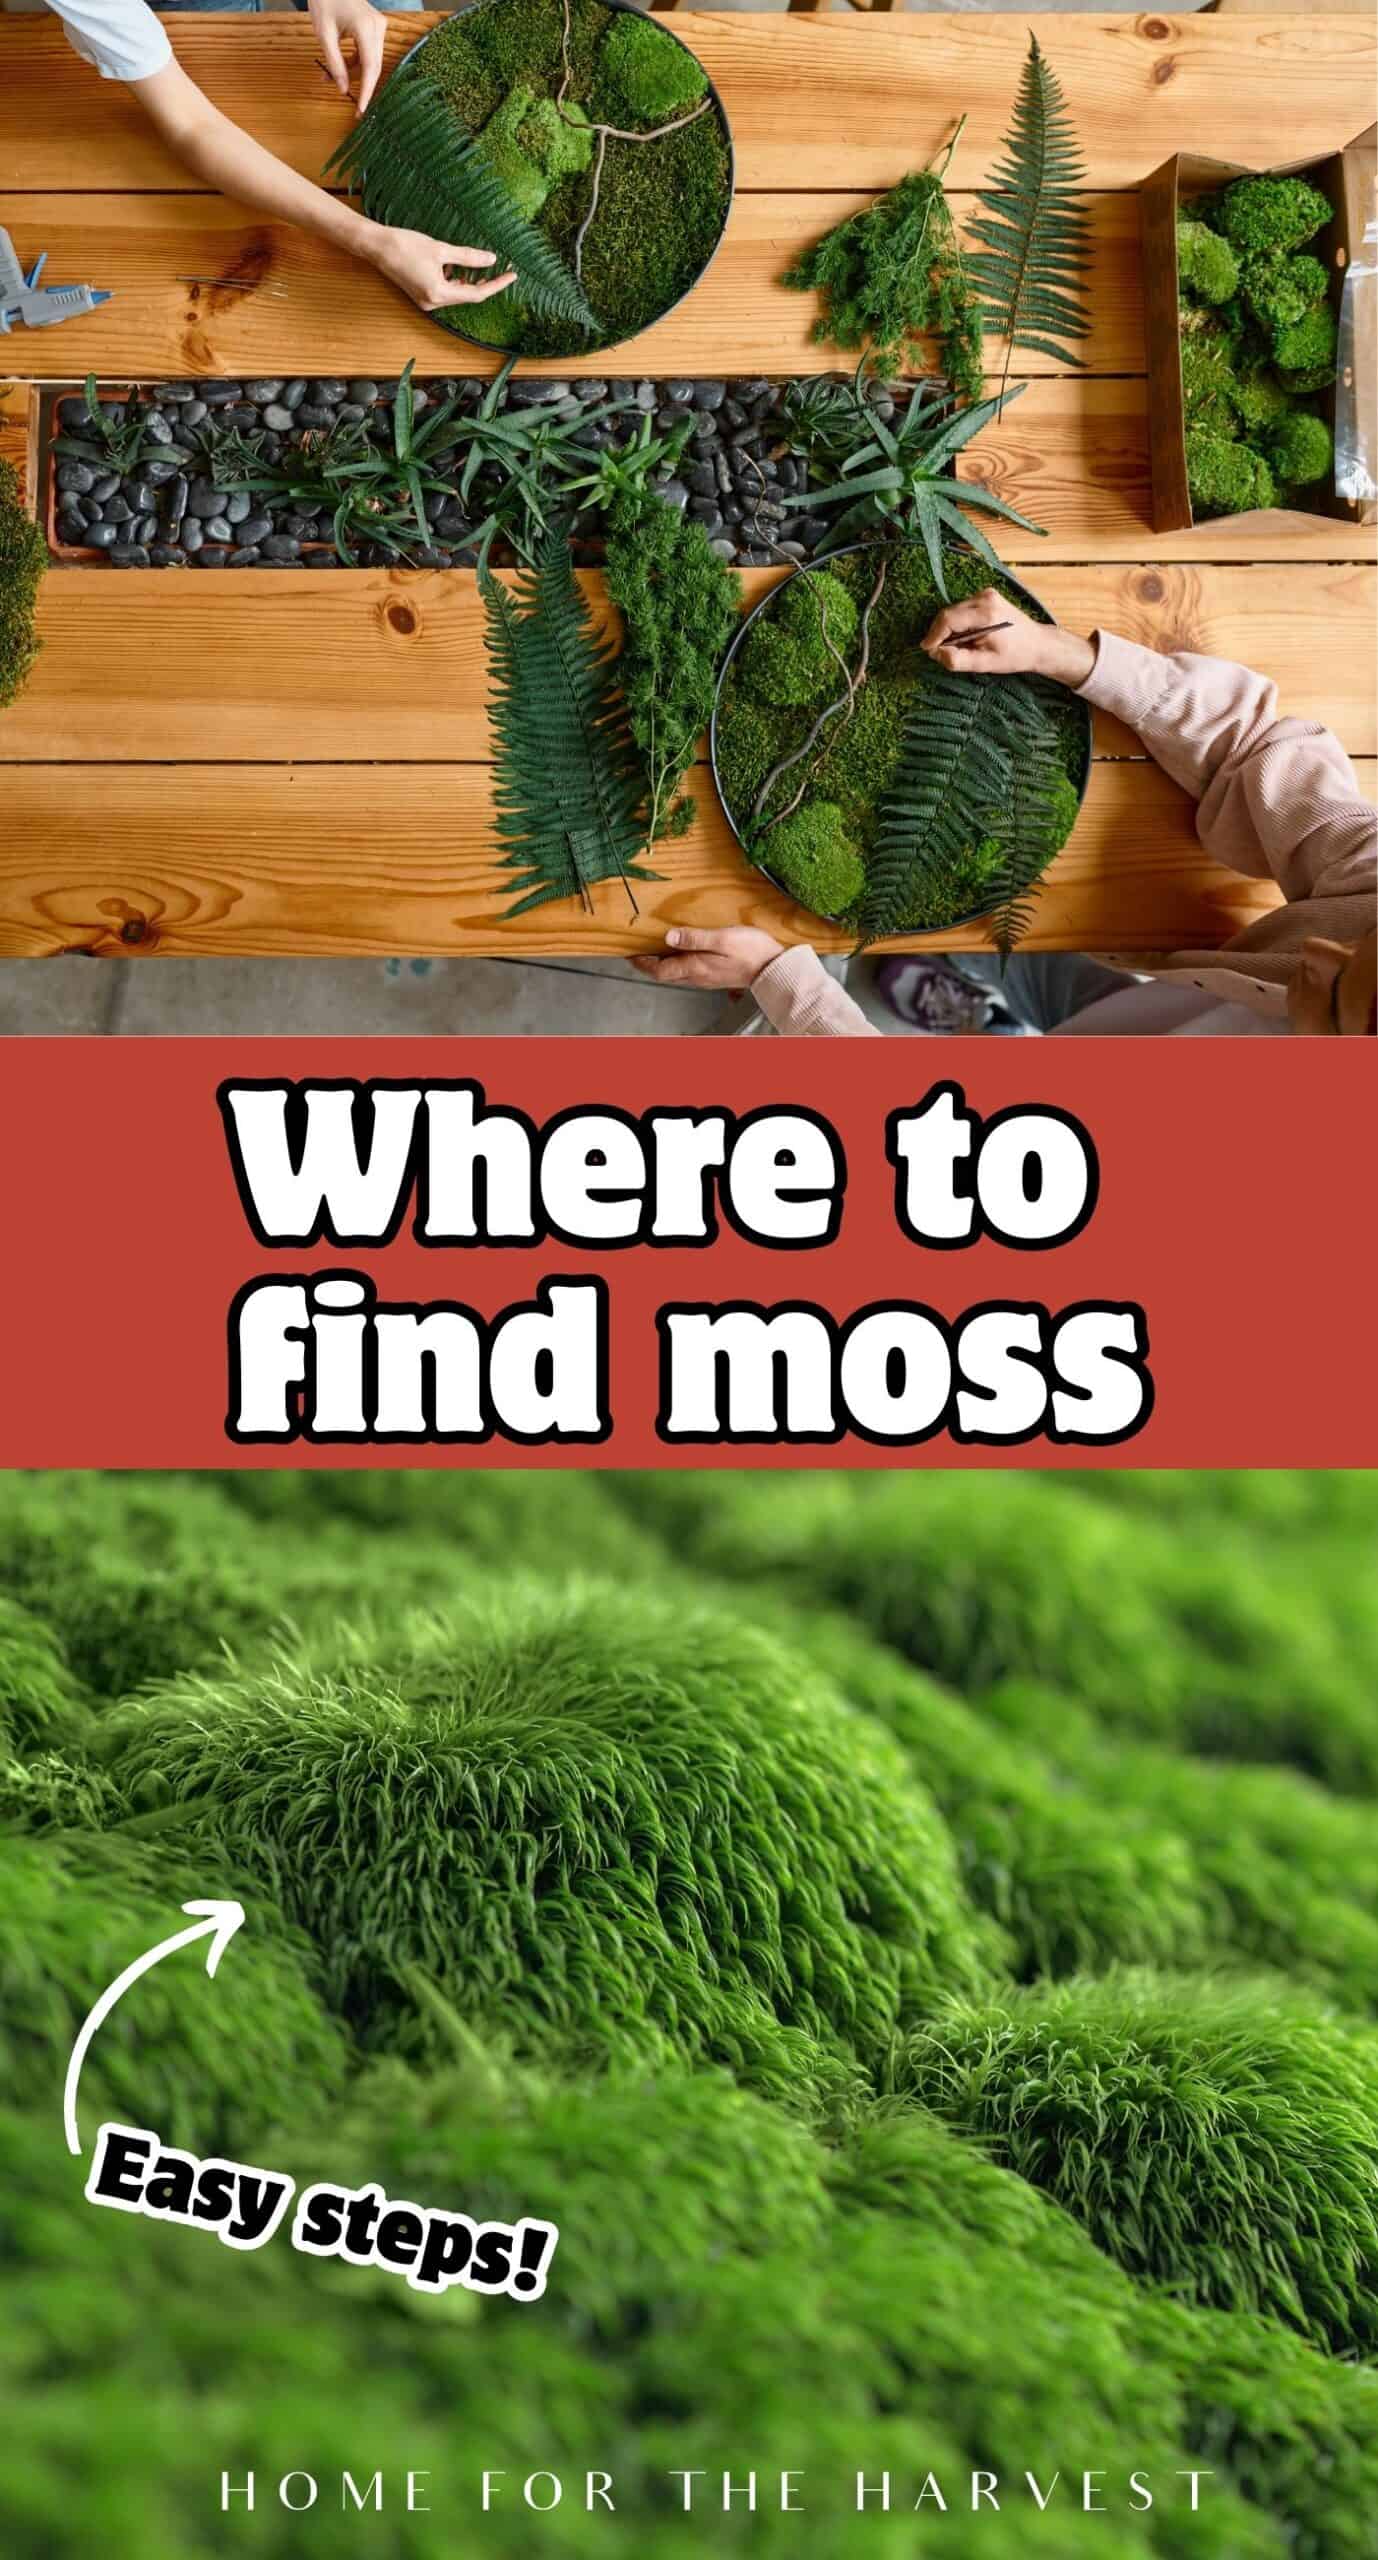 Where to find moss to use in crafts and floral art (and how to collect moss) via @home4theharvest